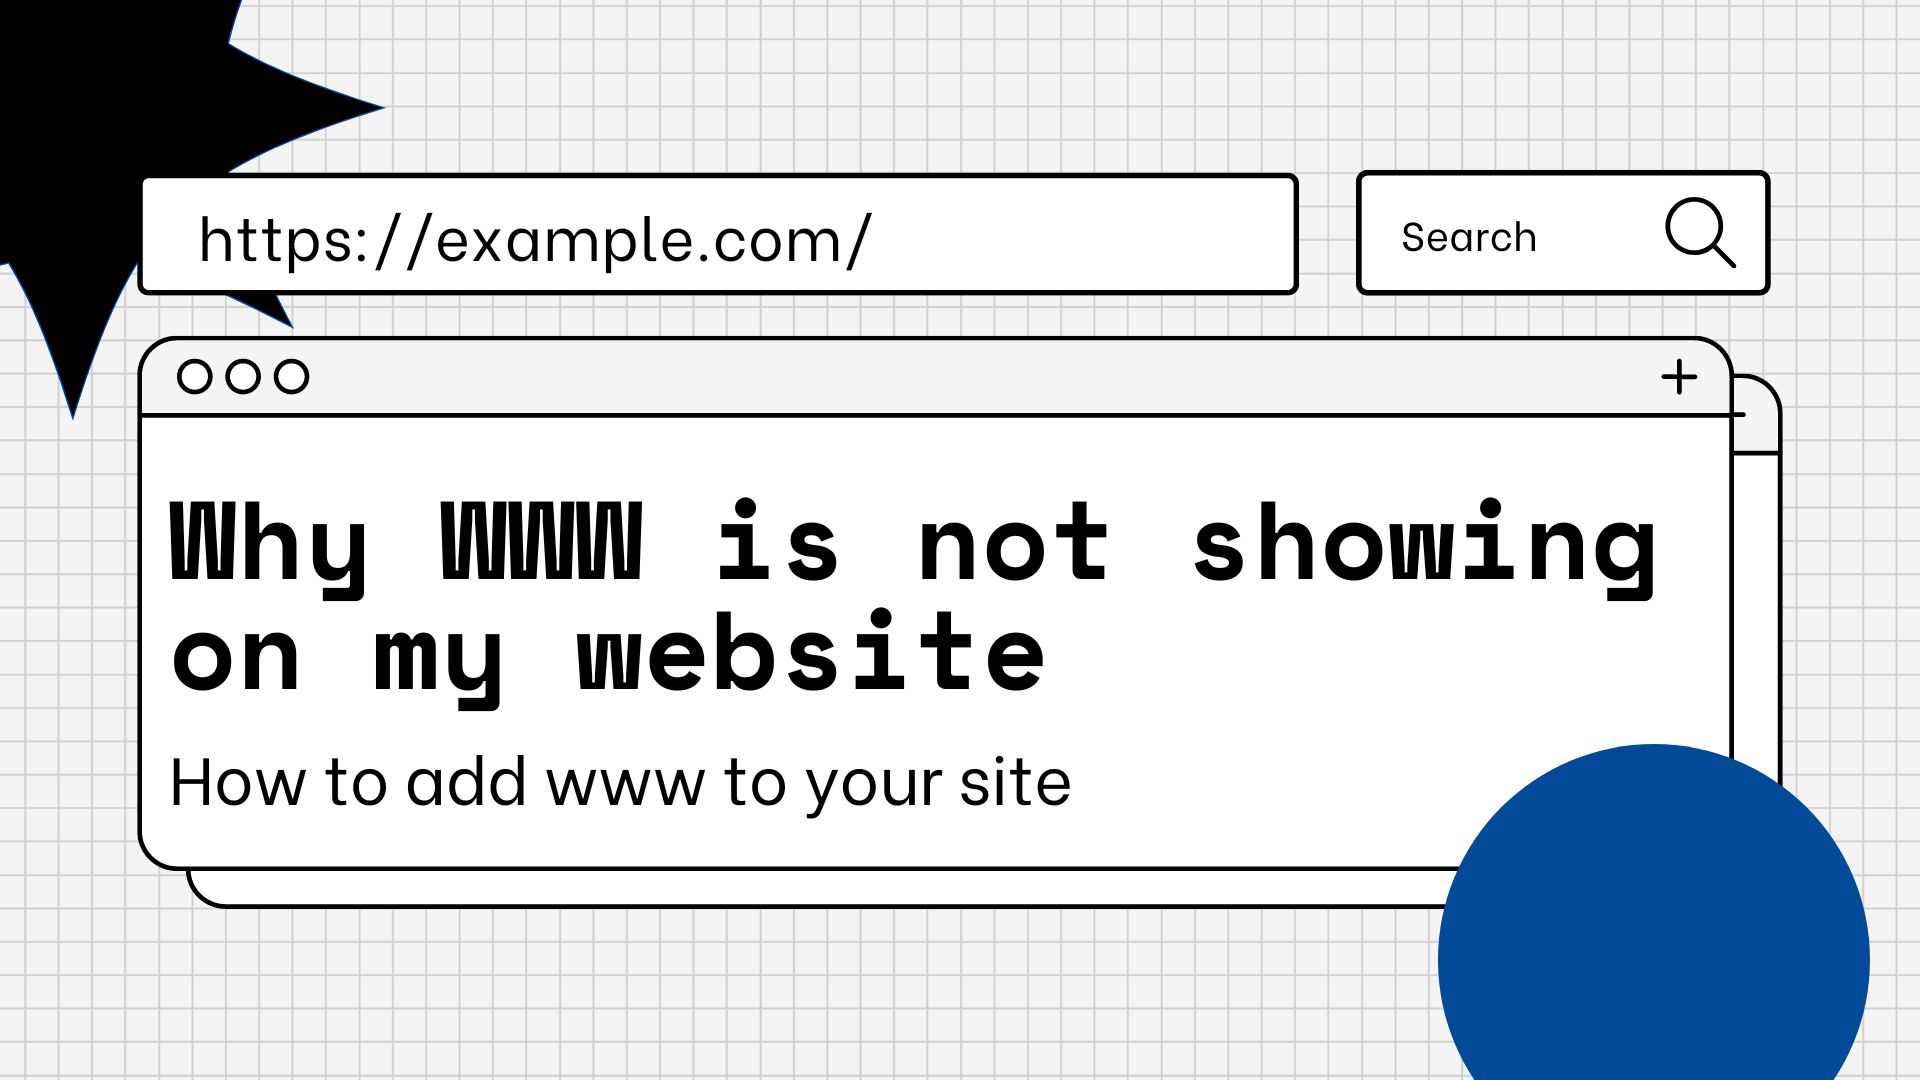 Why www is not showing on my website? How to add www